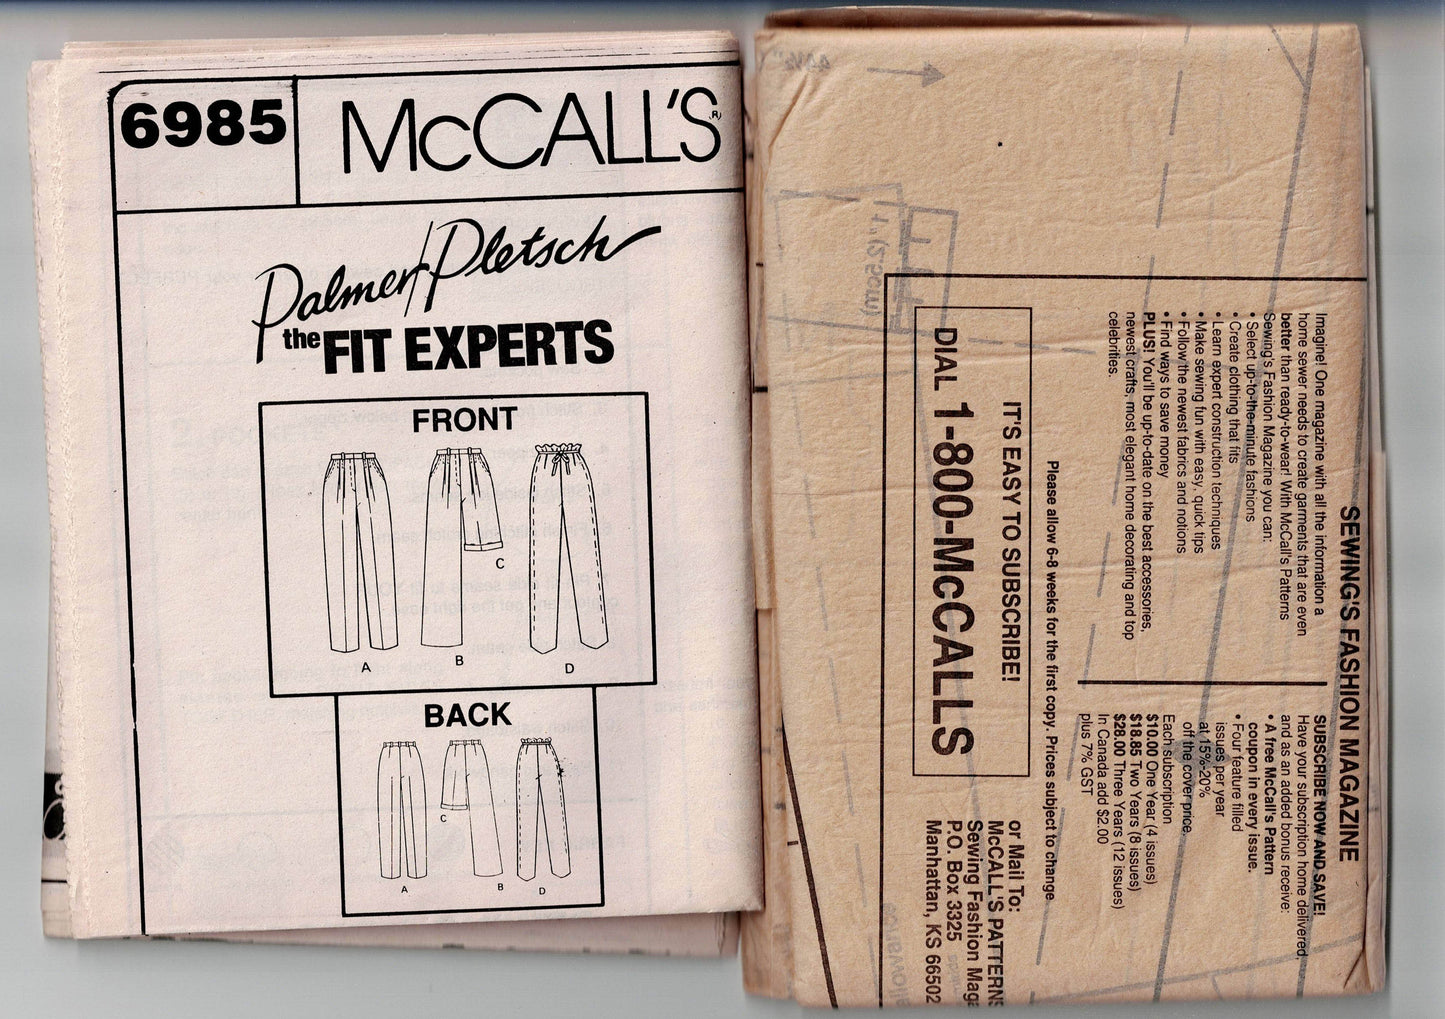 McCall's 6985 Womens PALMER PLETSCH Perfect Fit Pants & Shorts 1990s Vintage Sewing Pattern Size 14 UNCUT Factory Folded